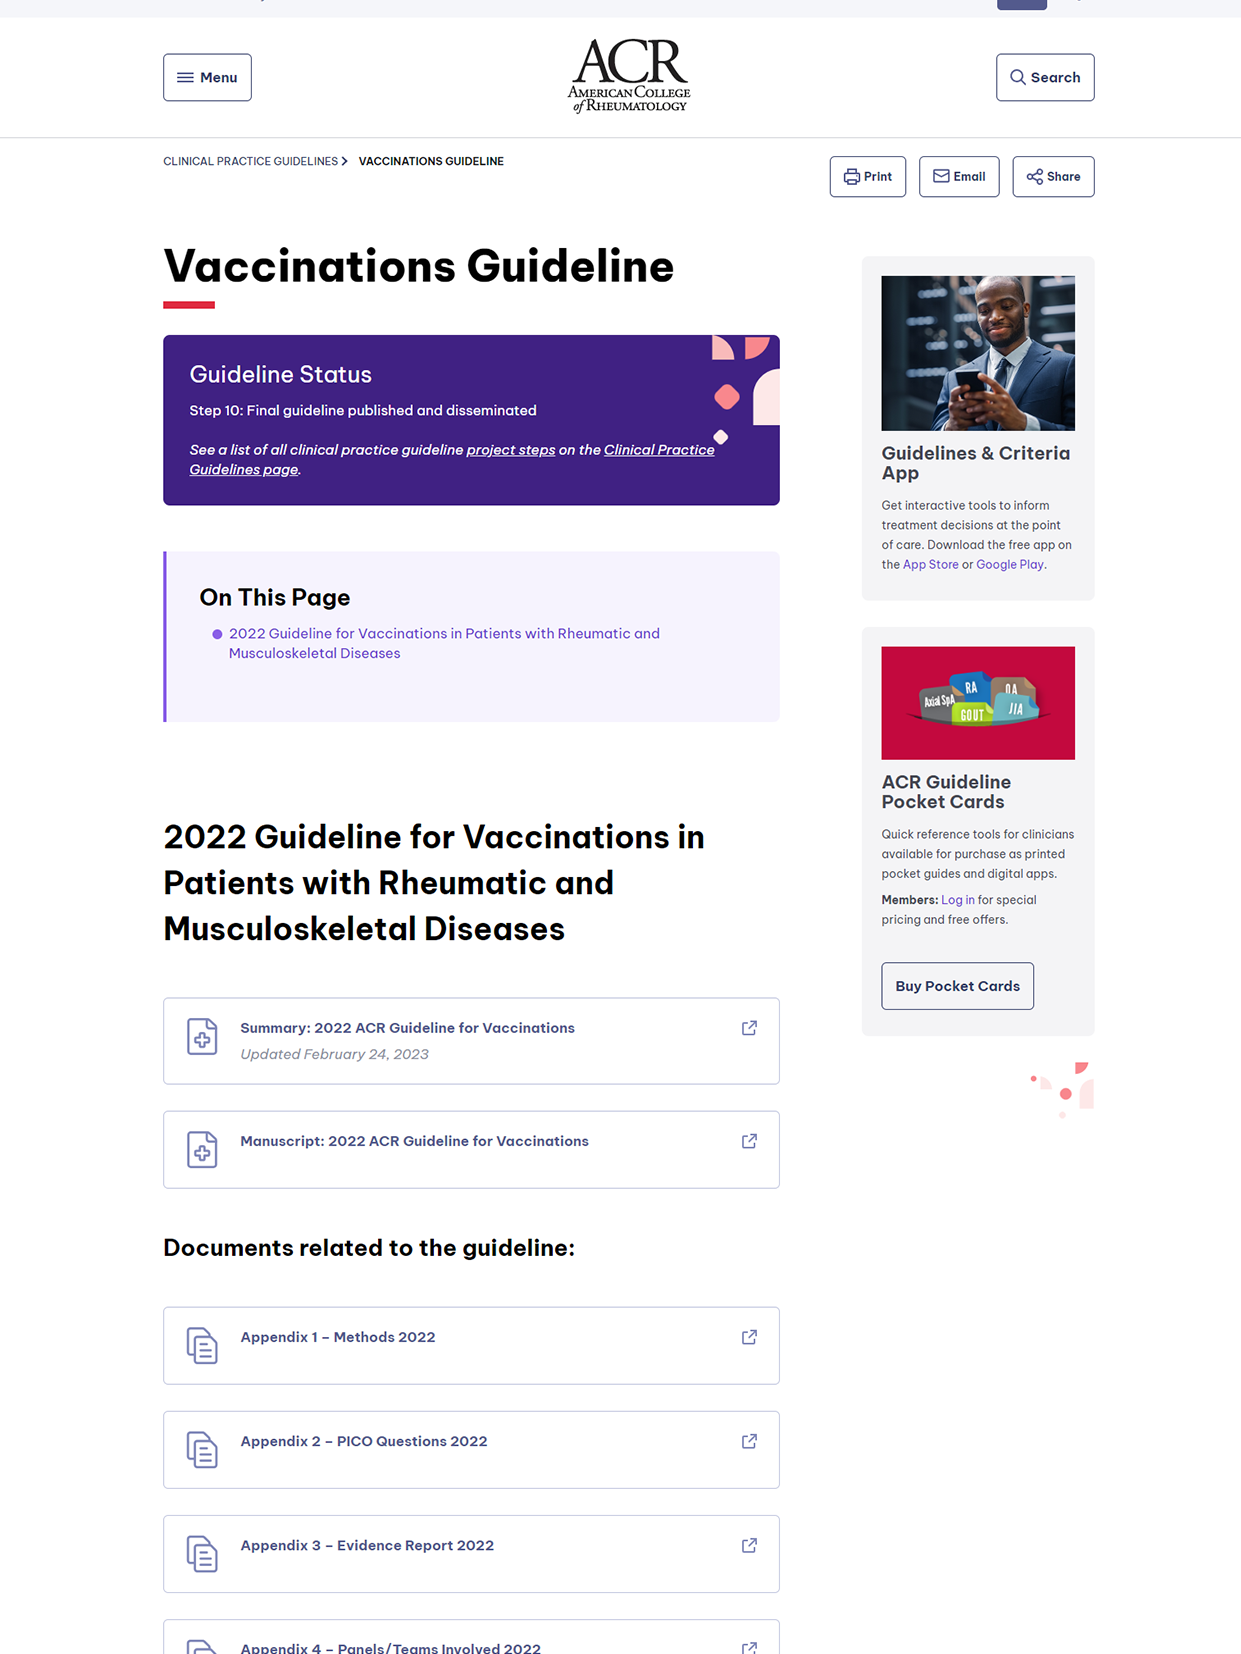 2022 Guideline for Vaccinations in Patients with Rheumatic and Musculoskeletal Diseases (ACR 2022)